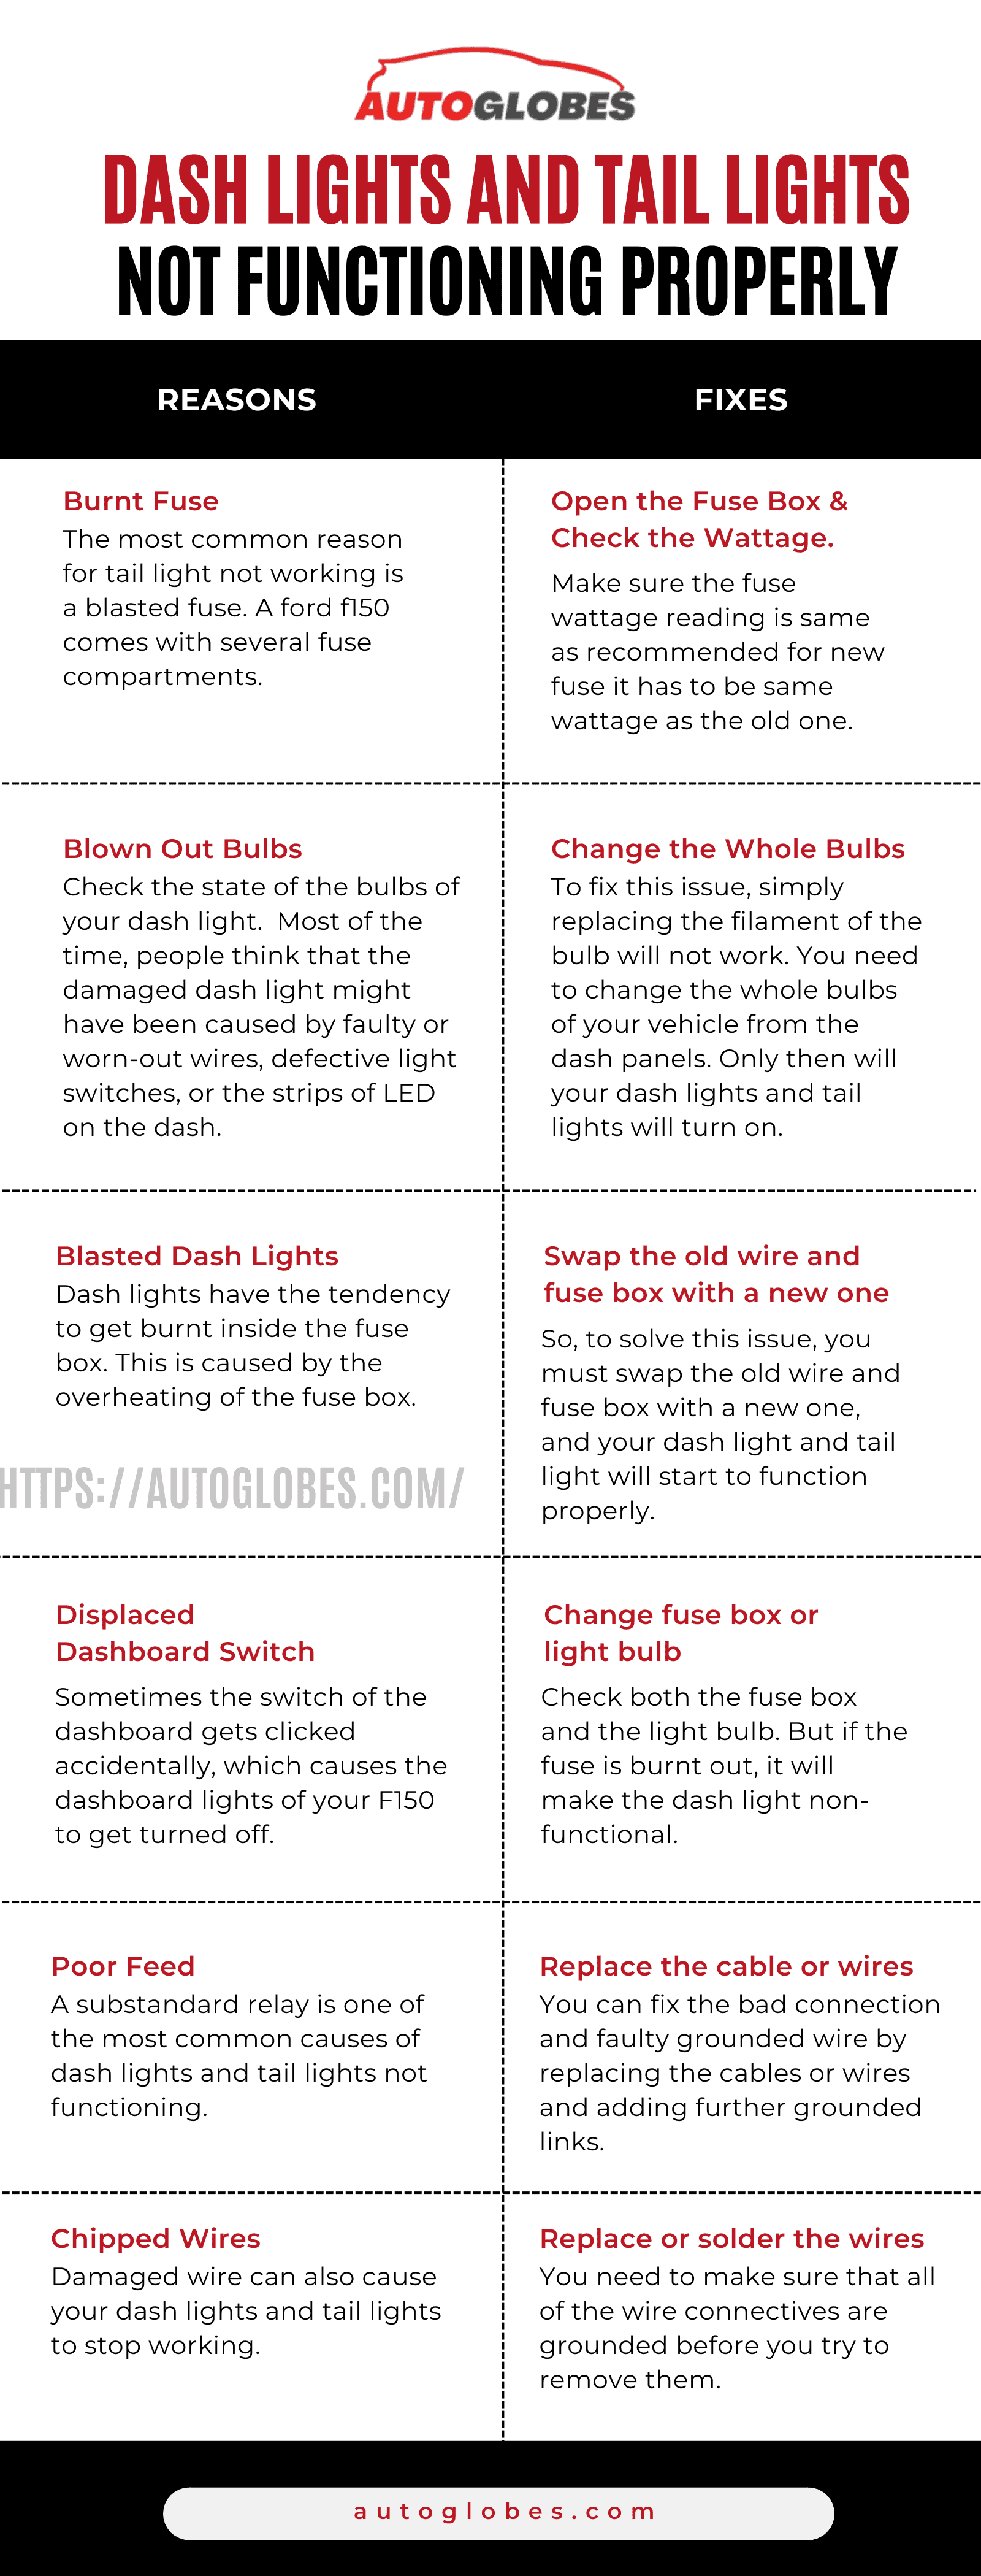 Dash Lights And Tail Lights Not Functioning Properly reasons and fixes infographic